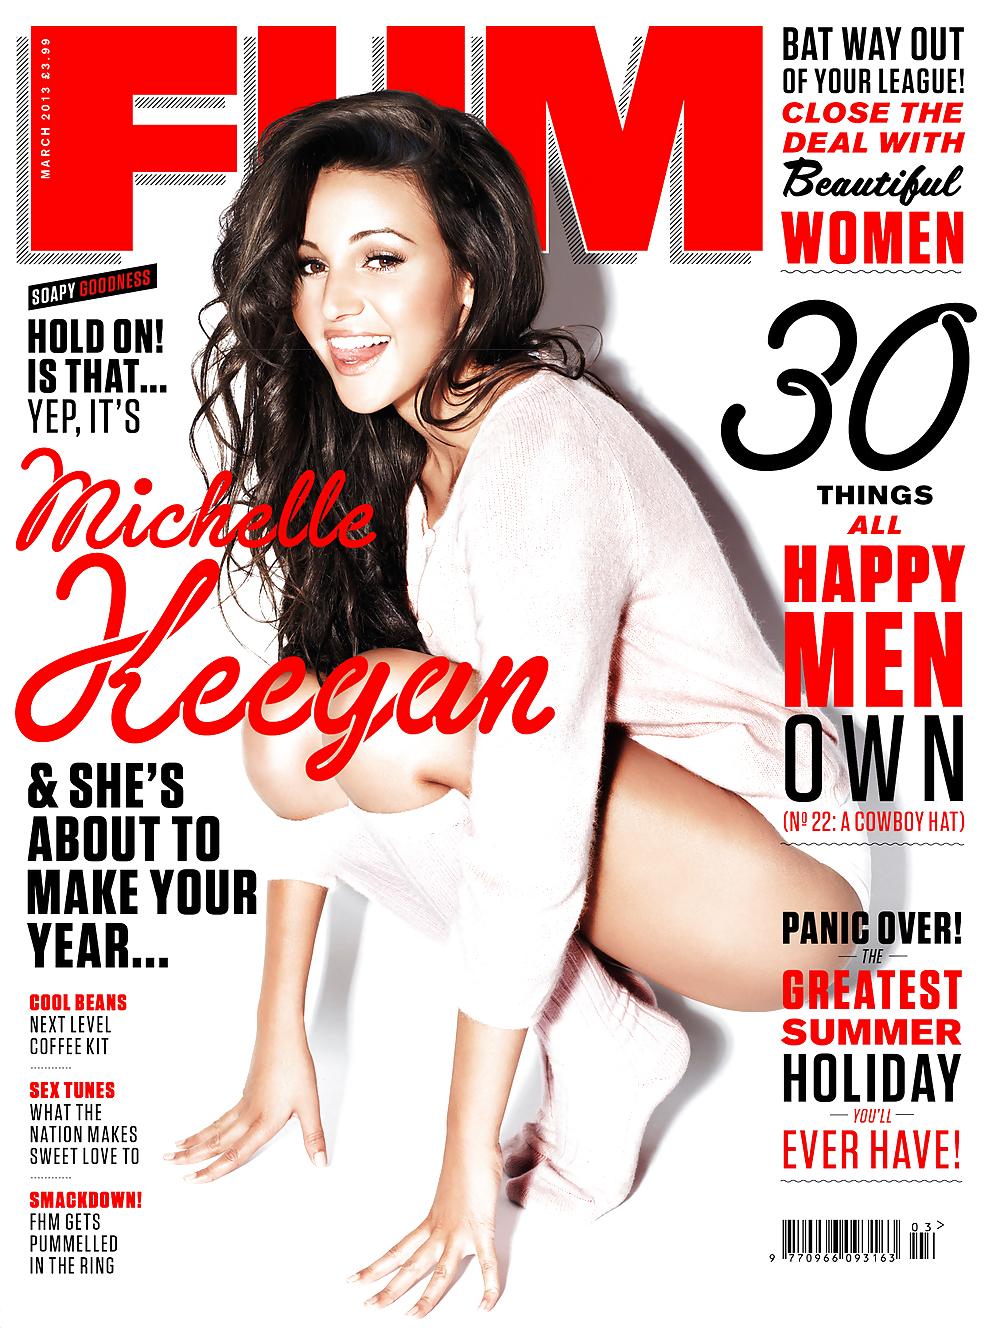 Michelle keegan, new and old fhm pics